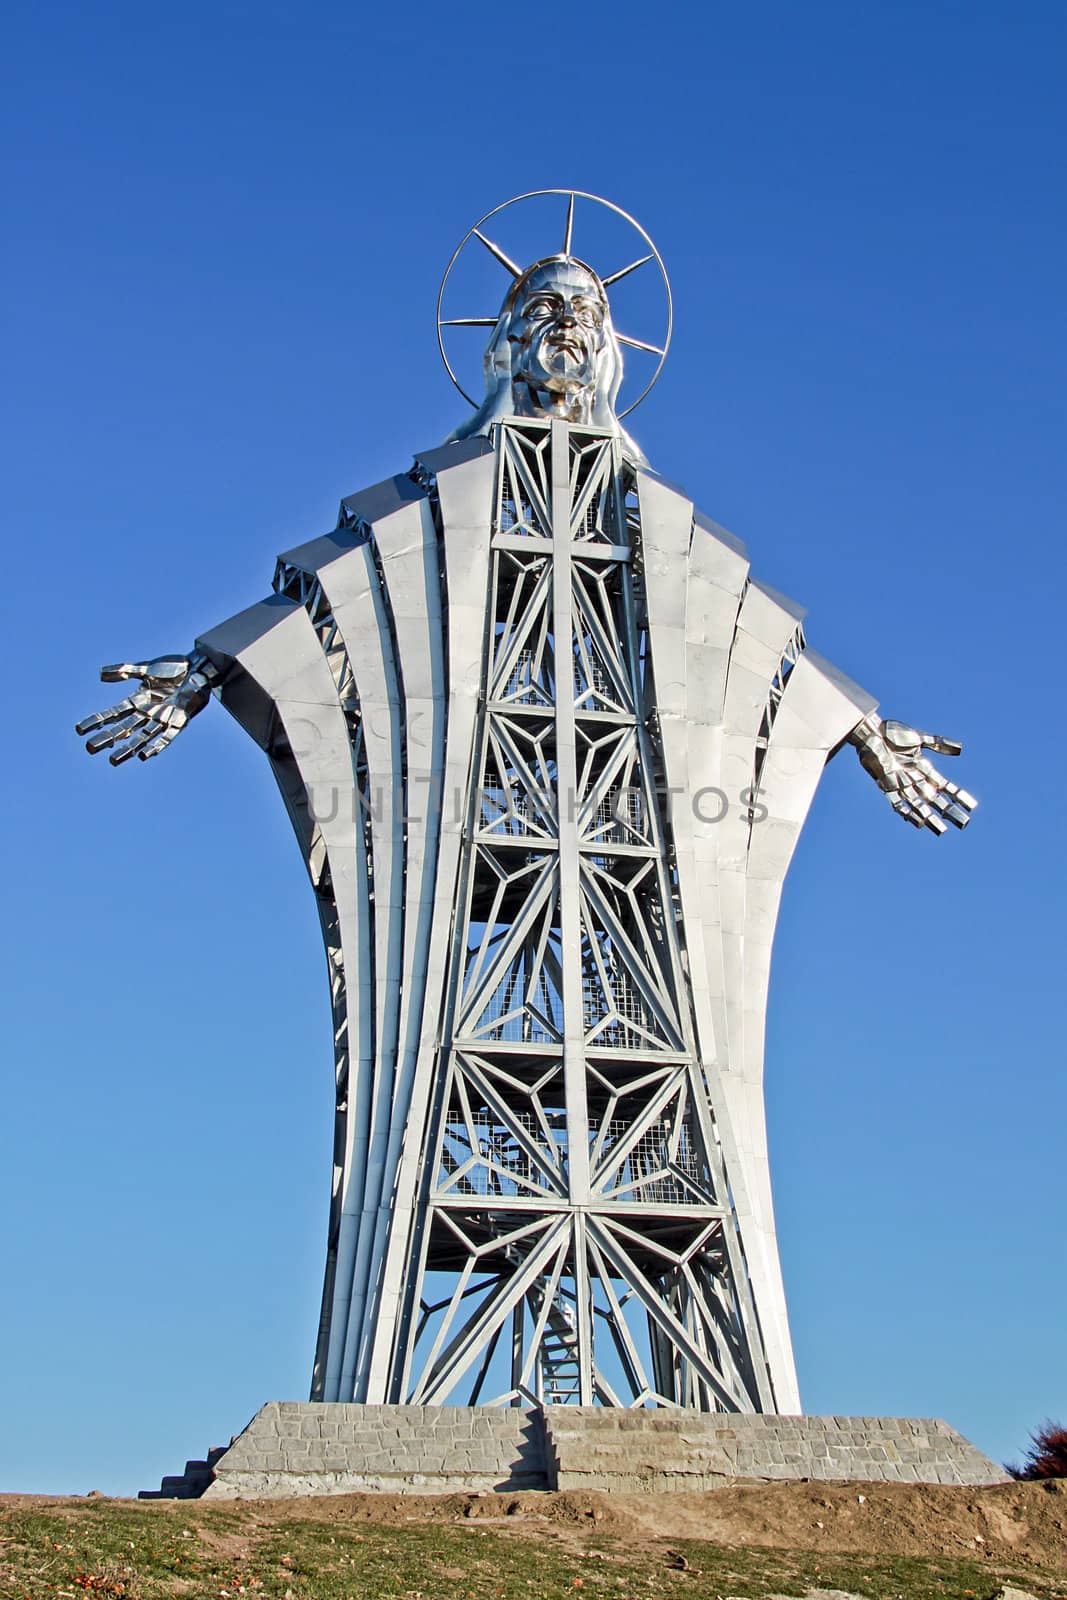 Huge steel statue and viewing tower in Lupeni, Szeklerland, Transylvania